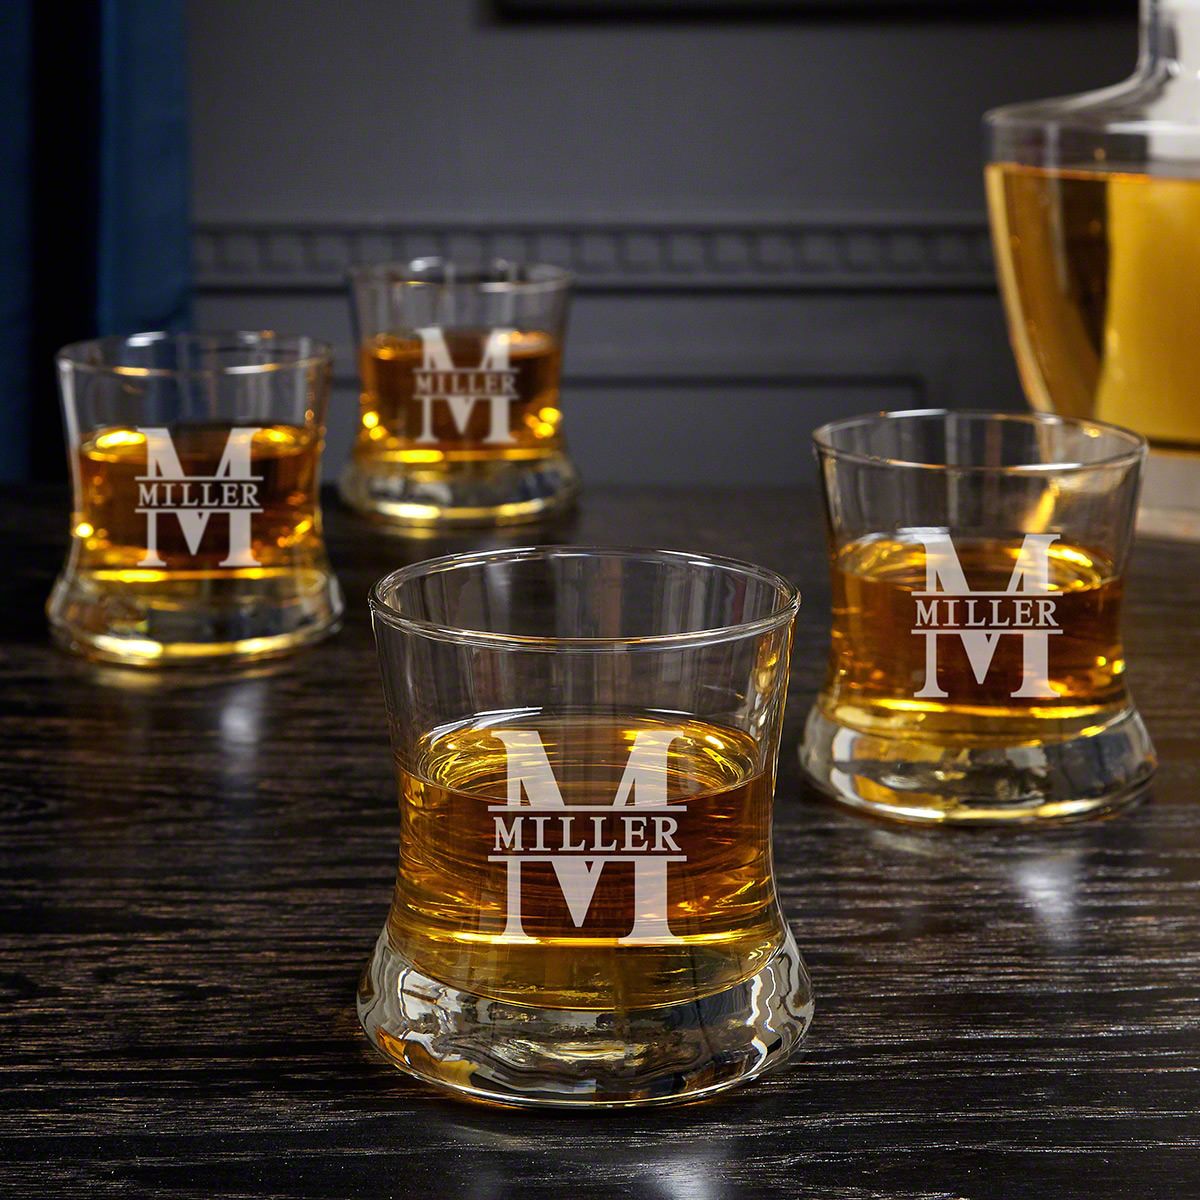 Whiskey Glasses Set of 2 with Matching Ice Ball Molds, Bourbon Glass